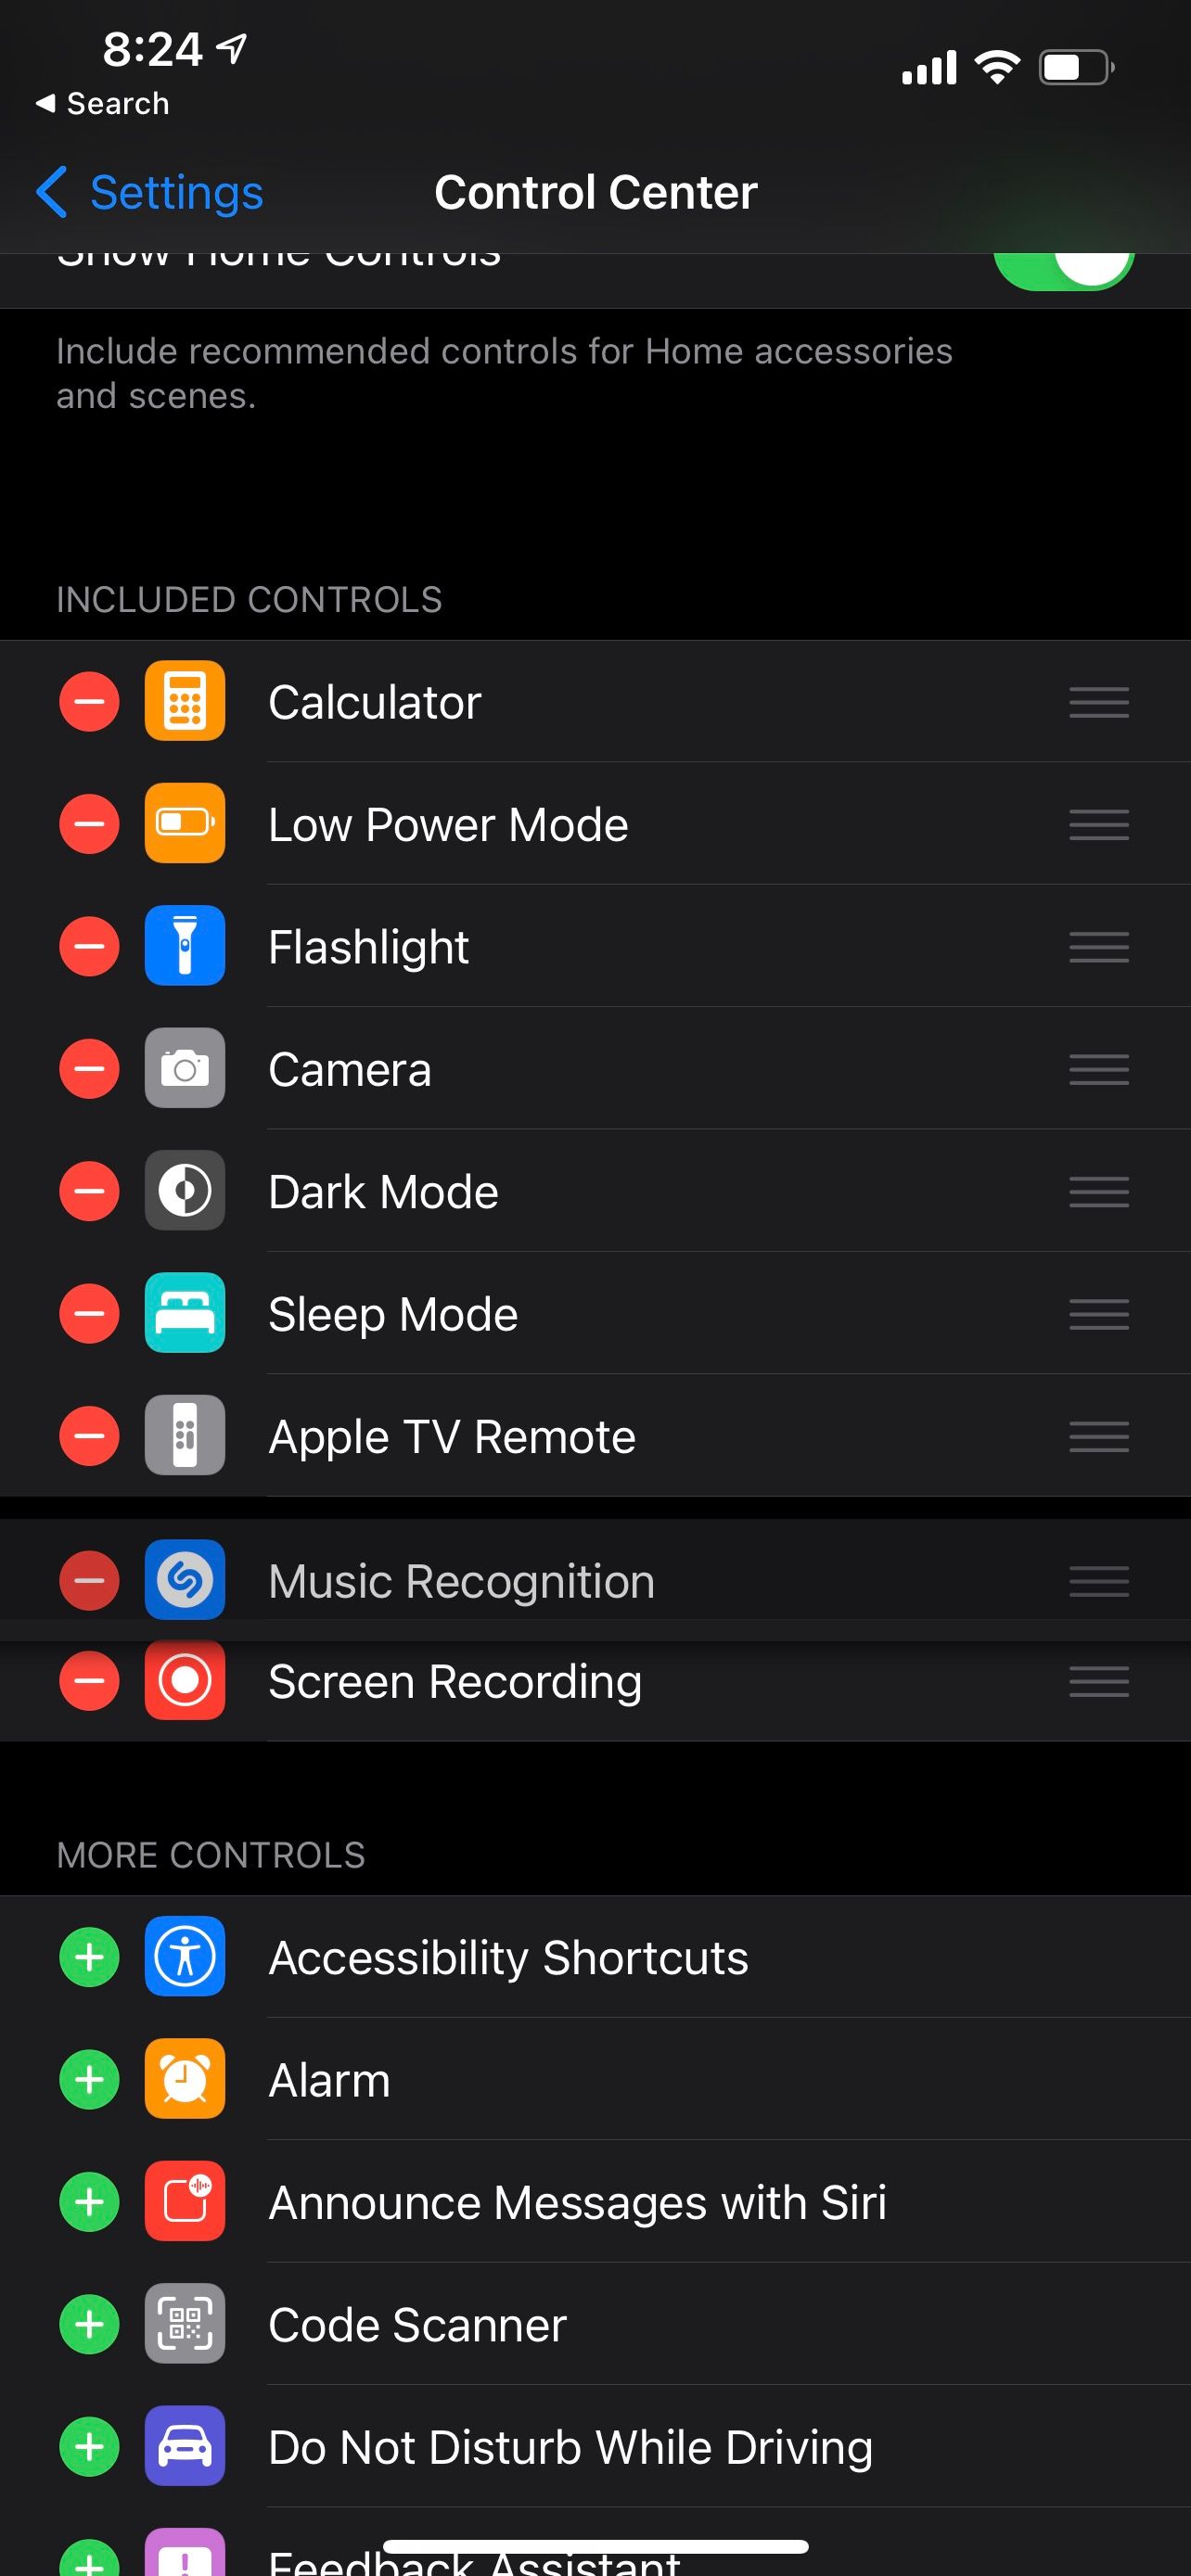 Control center settings while adding music recognition.